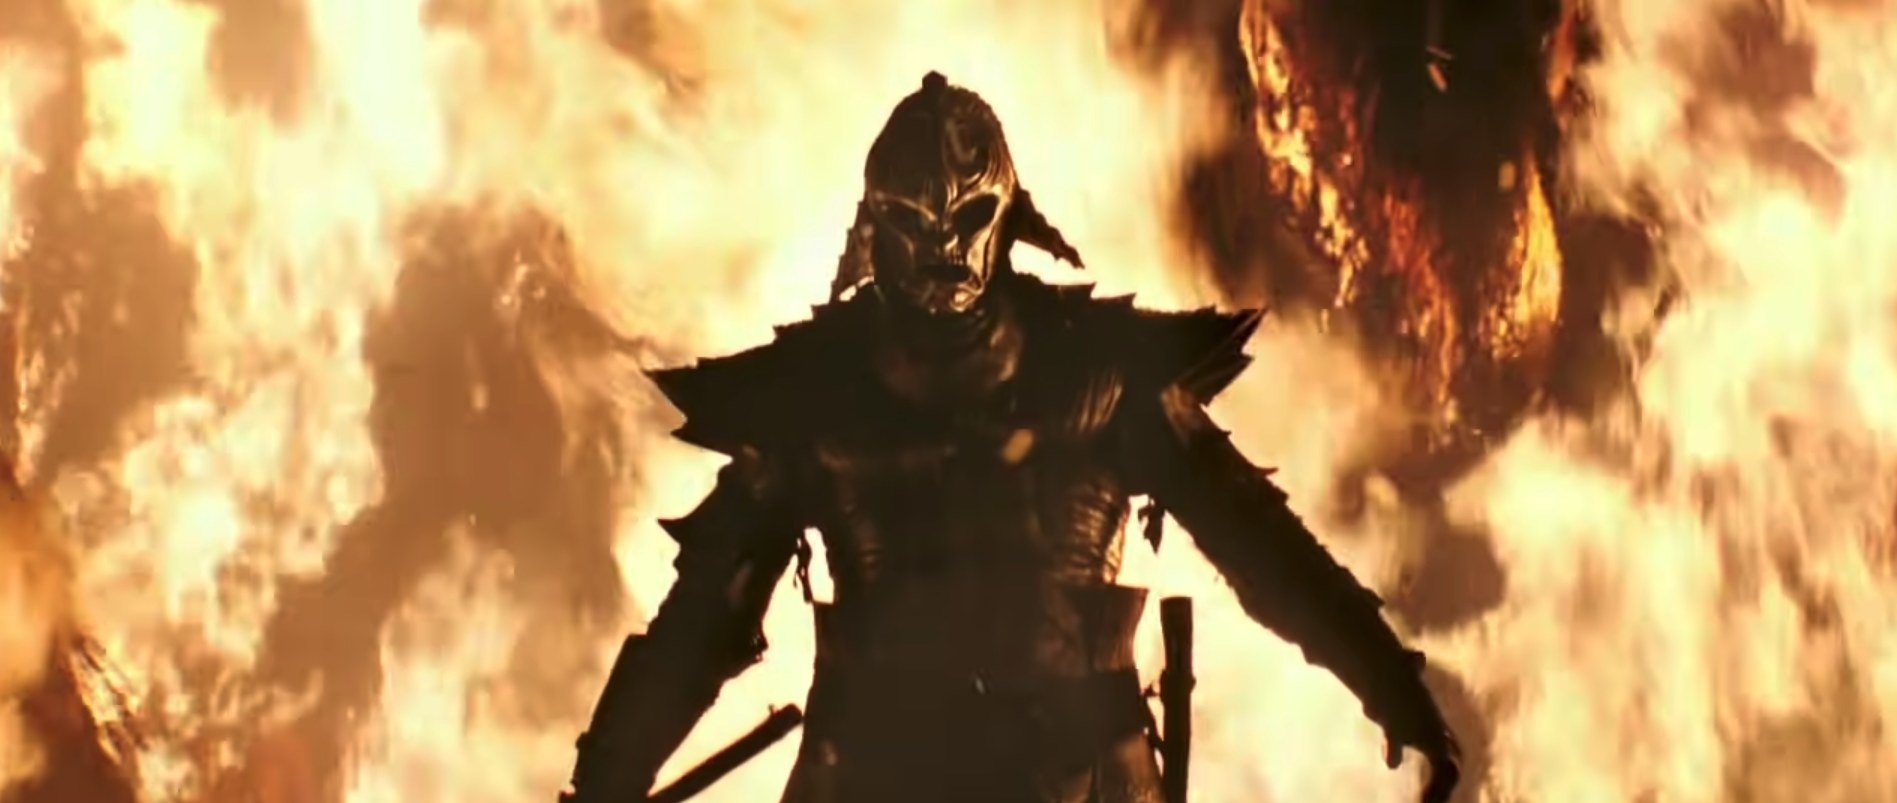 An armored figure walks out of the flames in &quot;47 Ronin&quot;